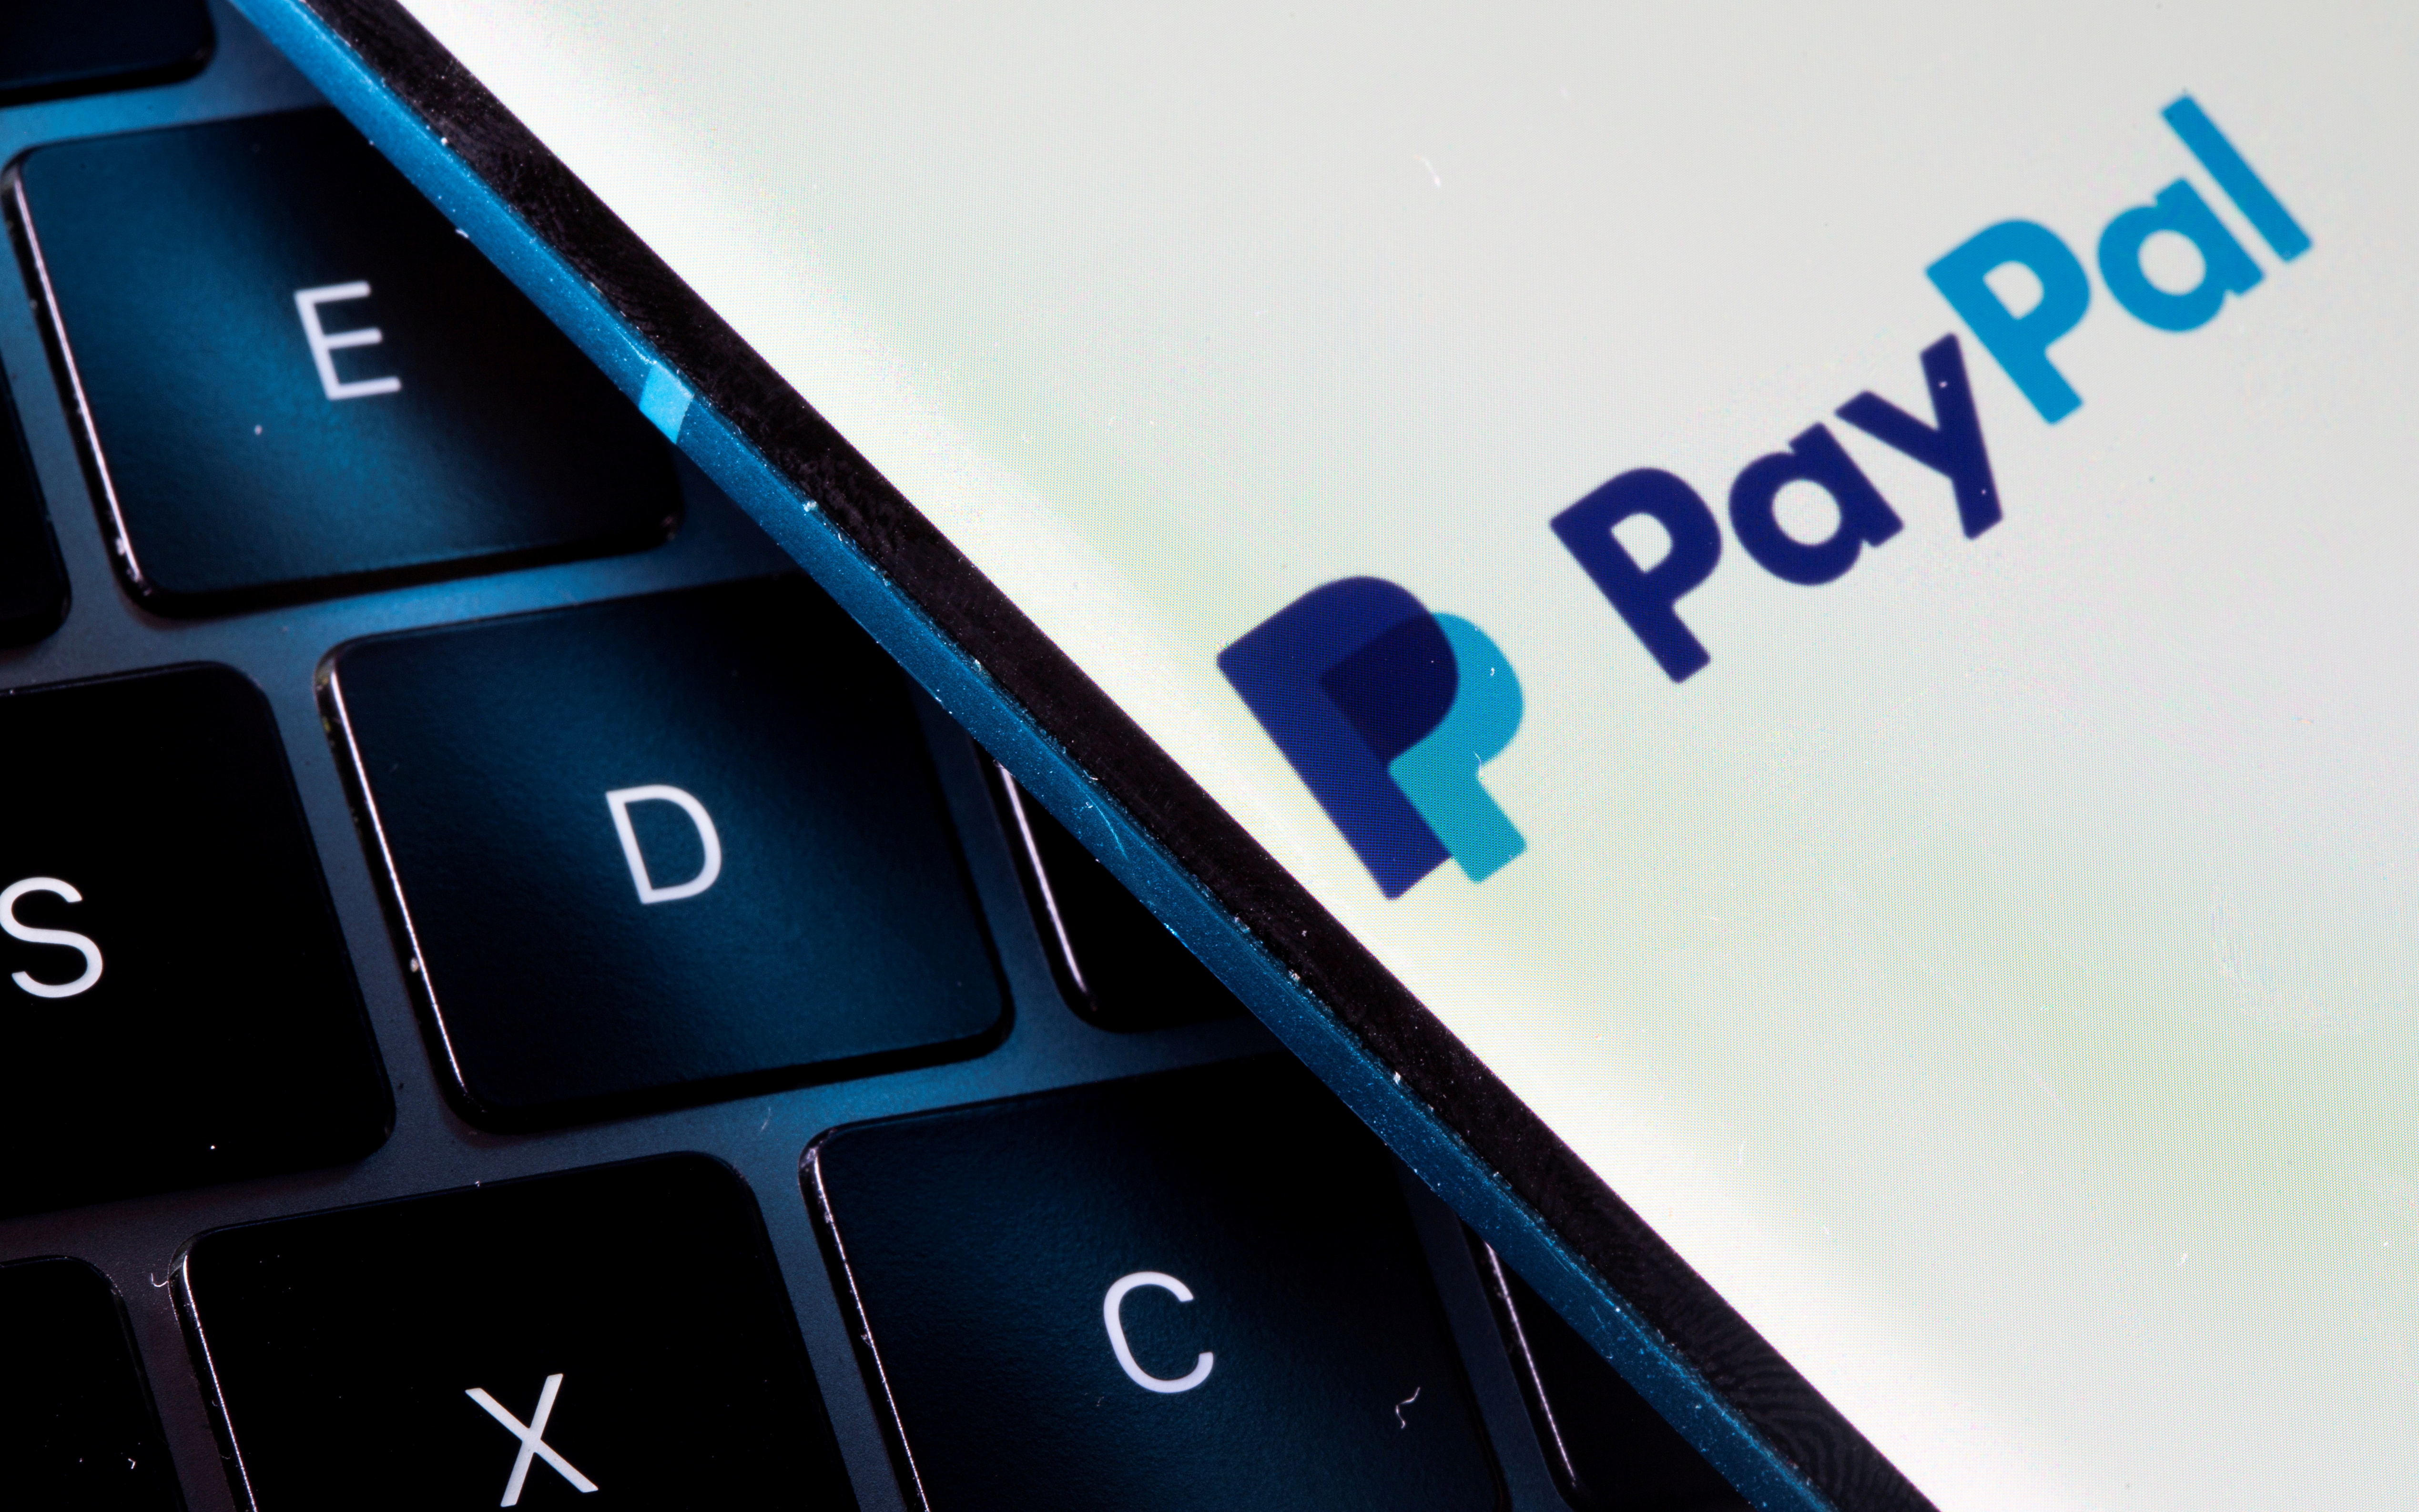 A smartphone with the PayPal logo is placed on a laptop in this illustration taken on July 14, 2021. REUTERS/Dado Ruvic/Illustration